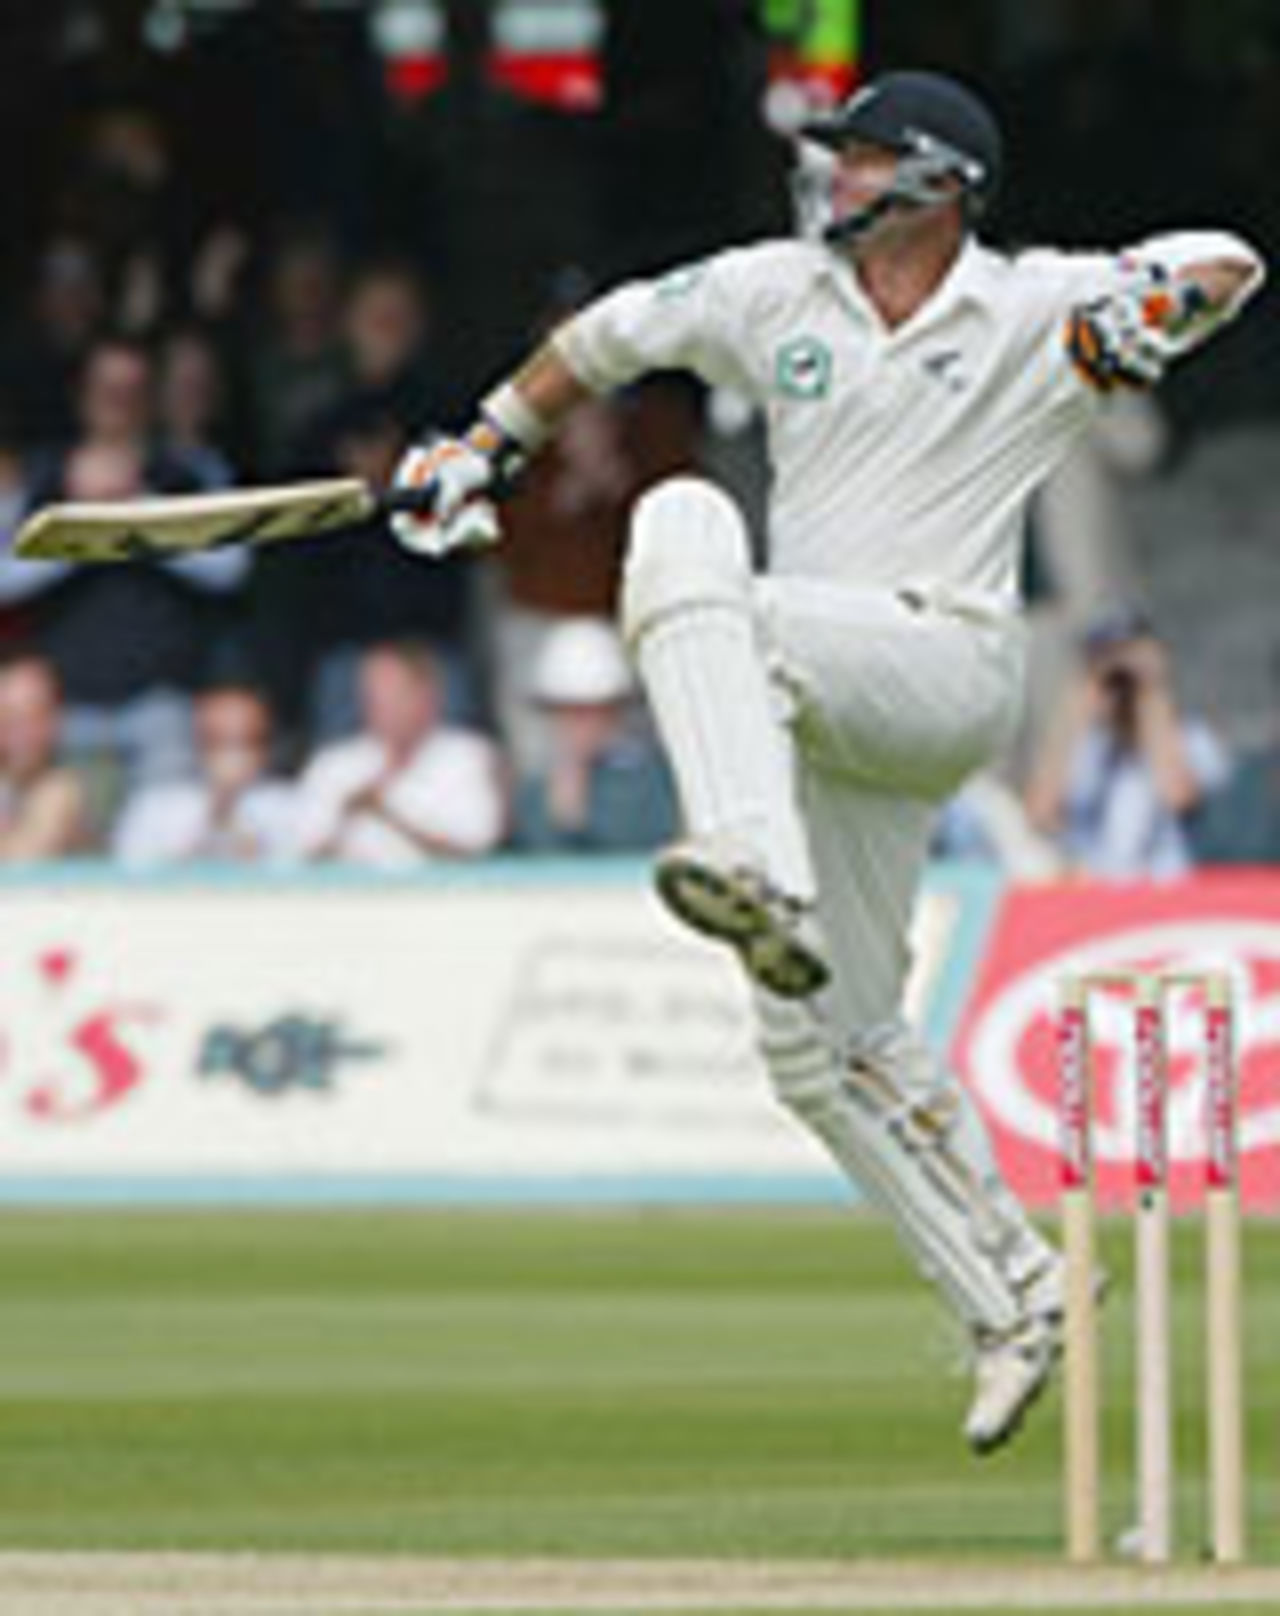 Mark Richardson reaches his hundred in the second innings, England v New Zealand, 1st Test, Lord's, May 22, 2004